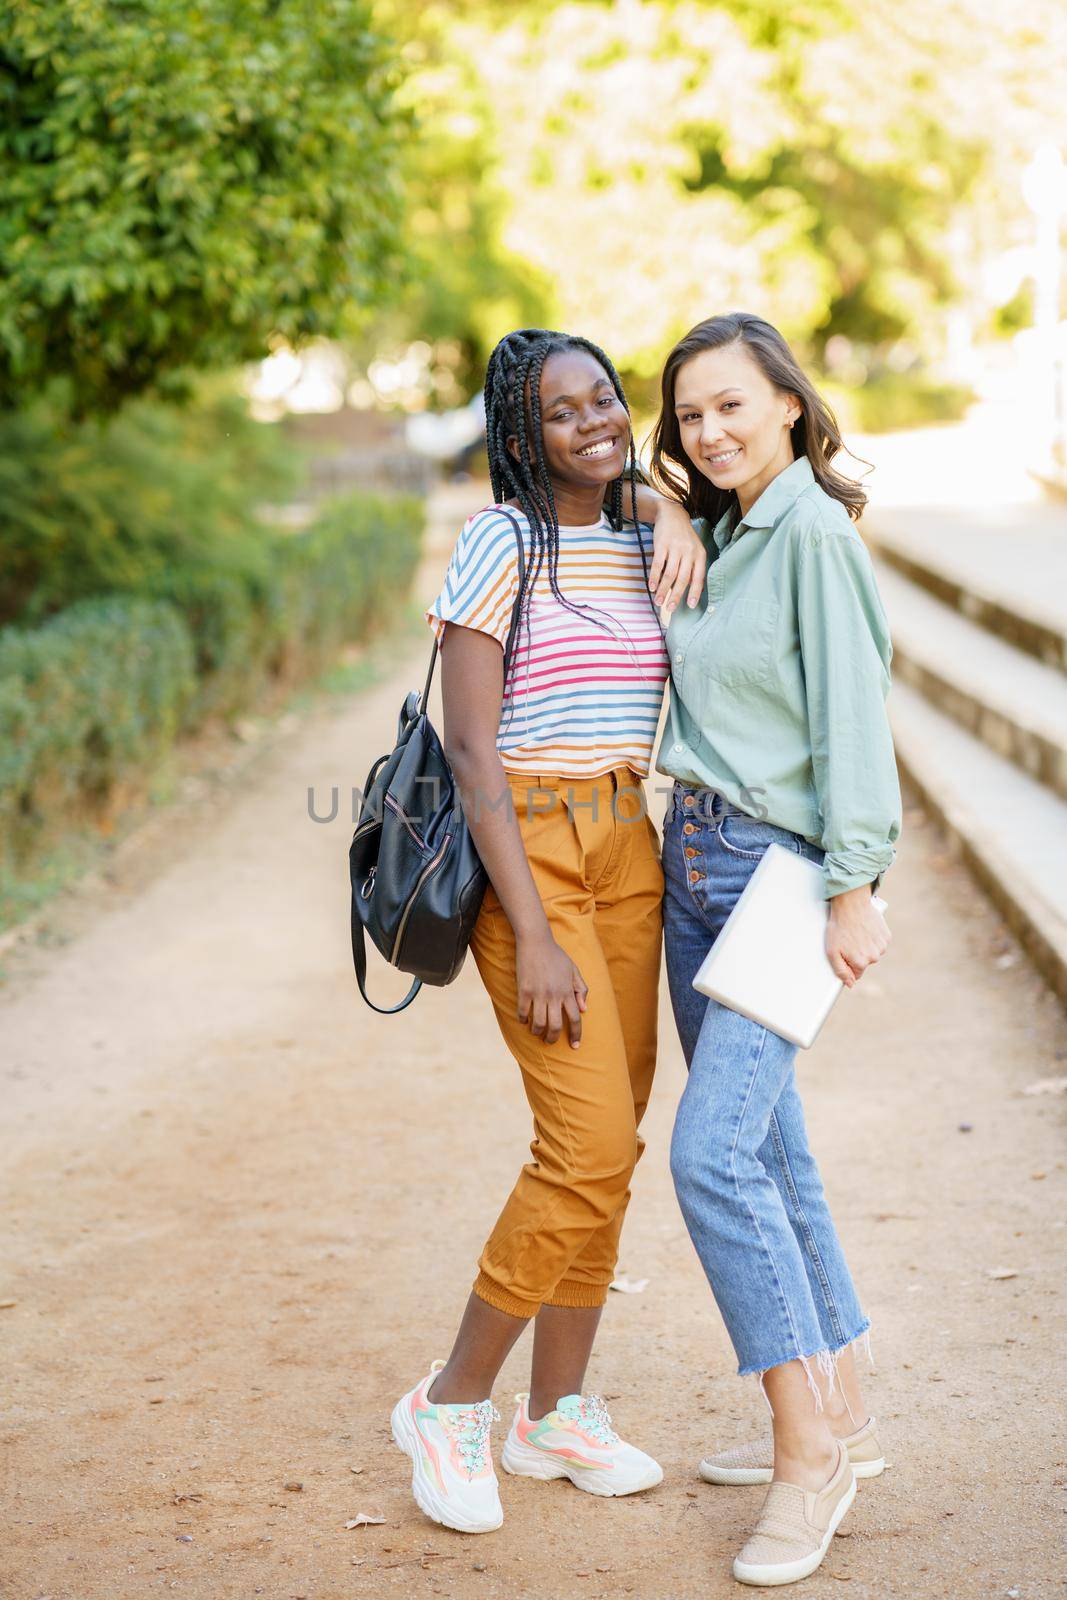 Two multiethnic female friends posing together with colorful casual clothing outdoors. Mutliethnic women.